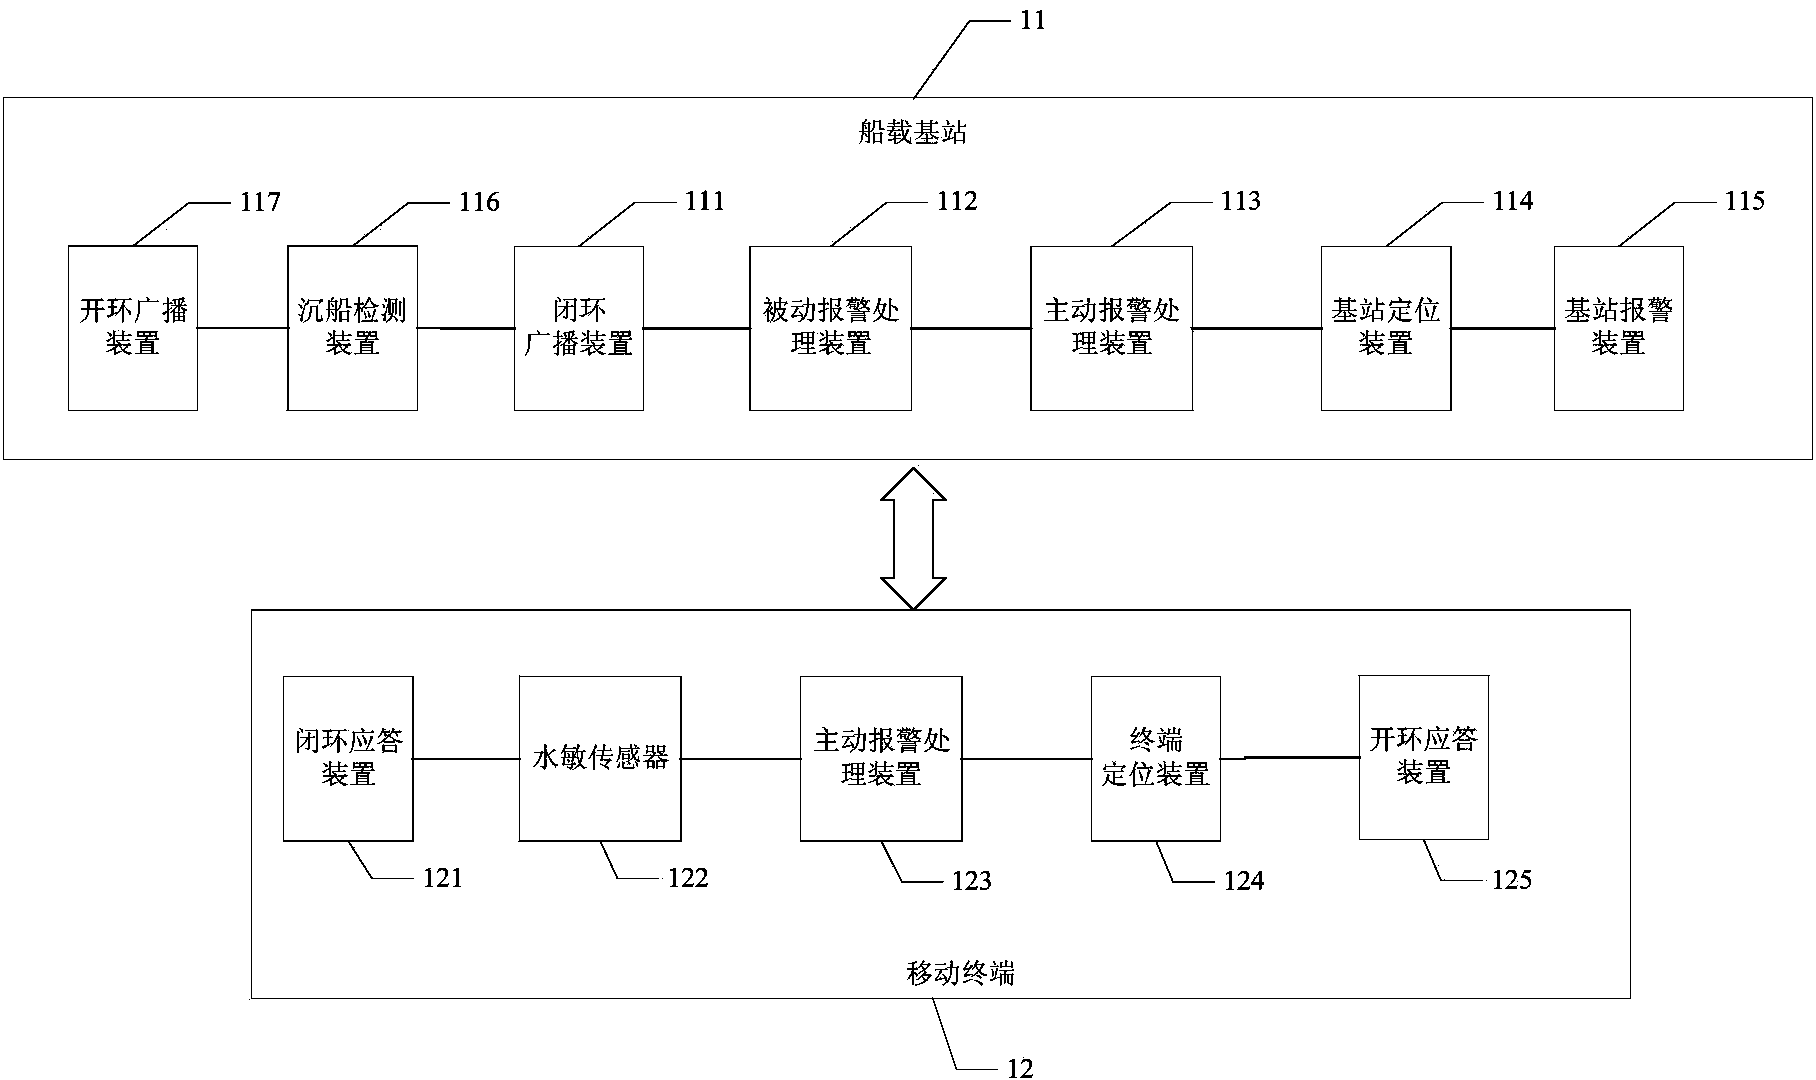 Sinking alarm system and method combining open loop mode with closed loop mode